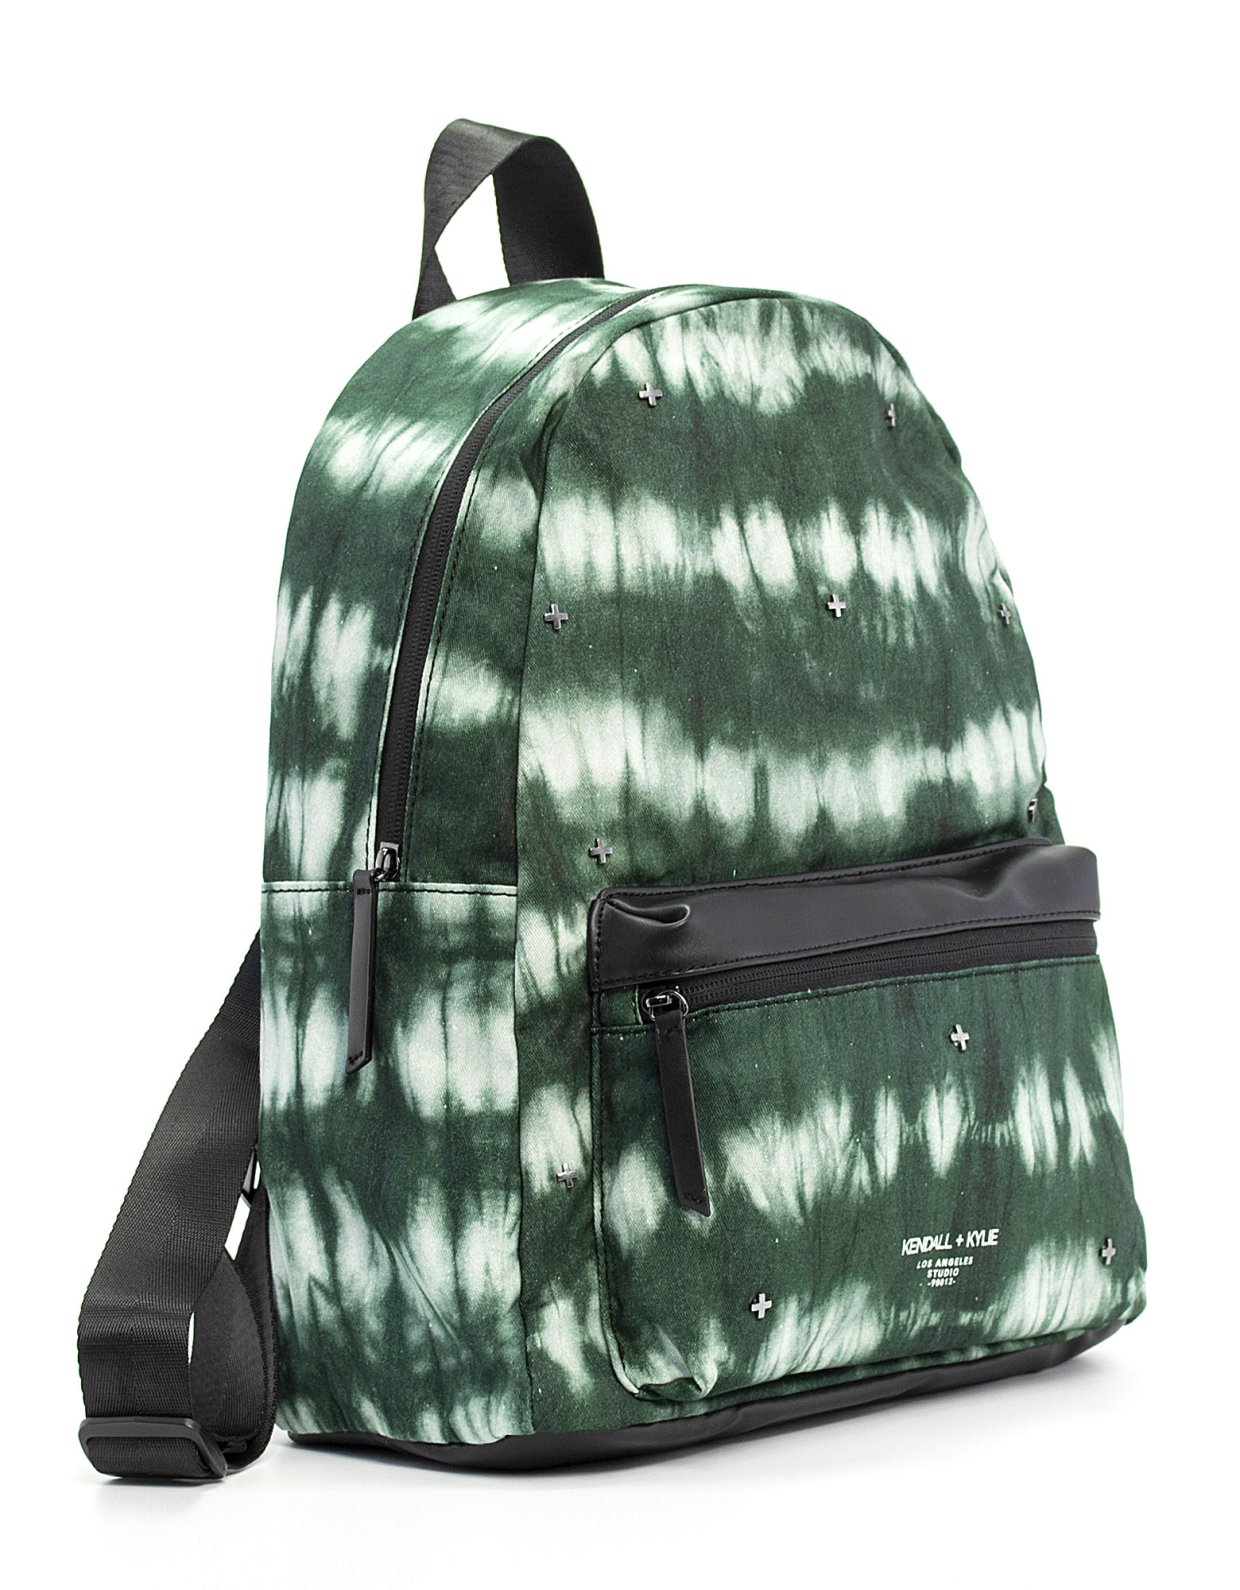 Kendall + Kylie Cora large backpack navy tie dye canvas